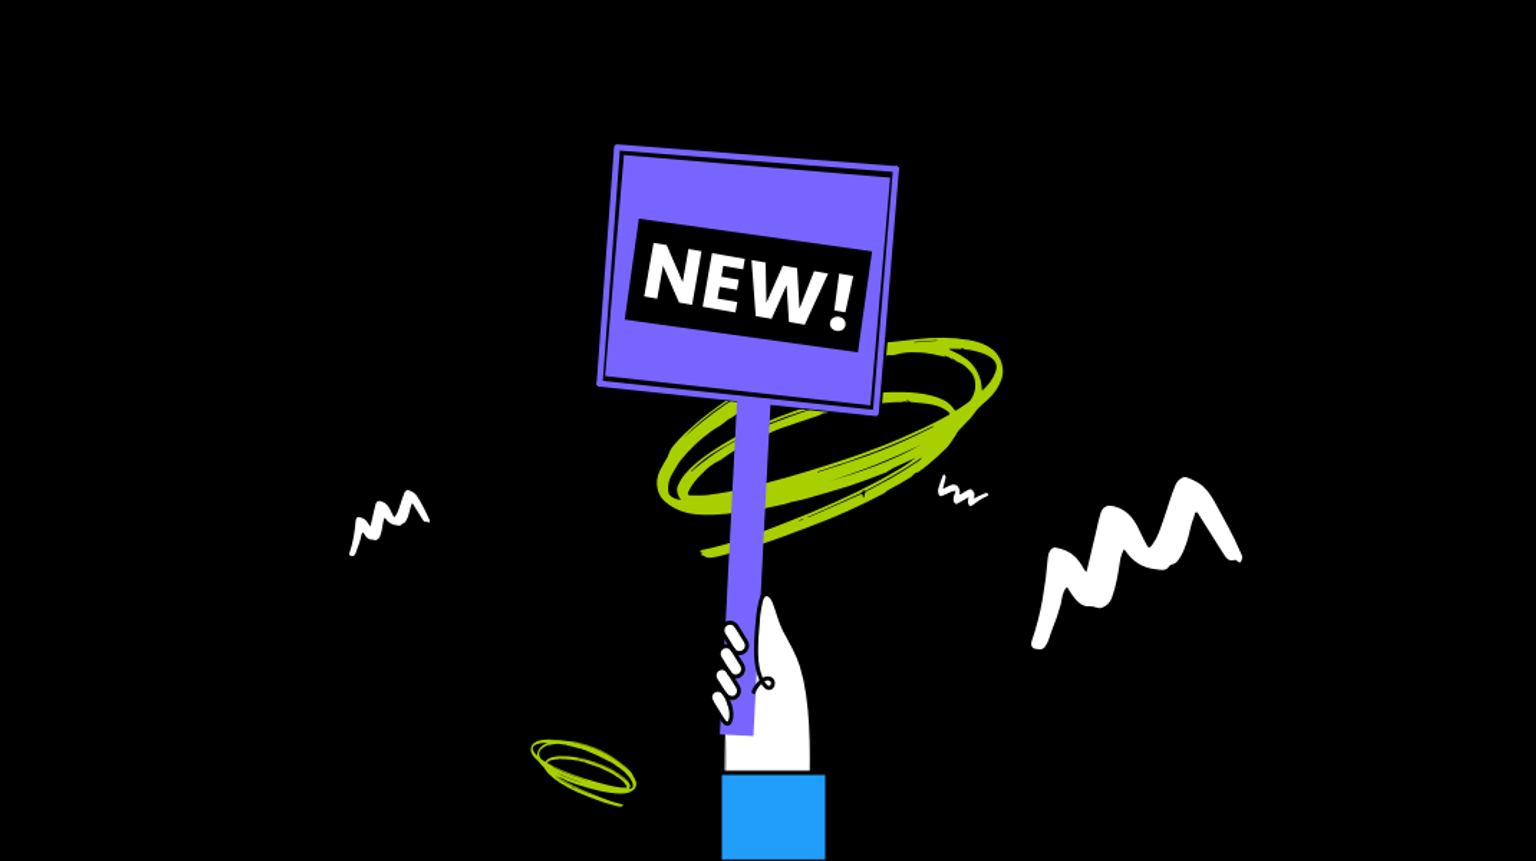 Introducing Knak Launch for Marketo